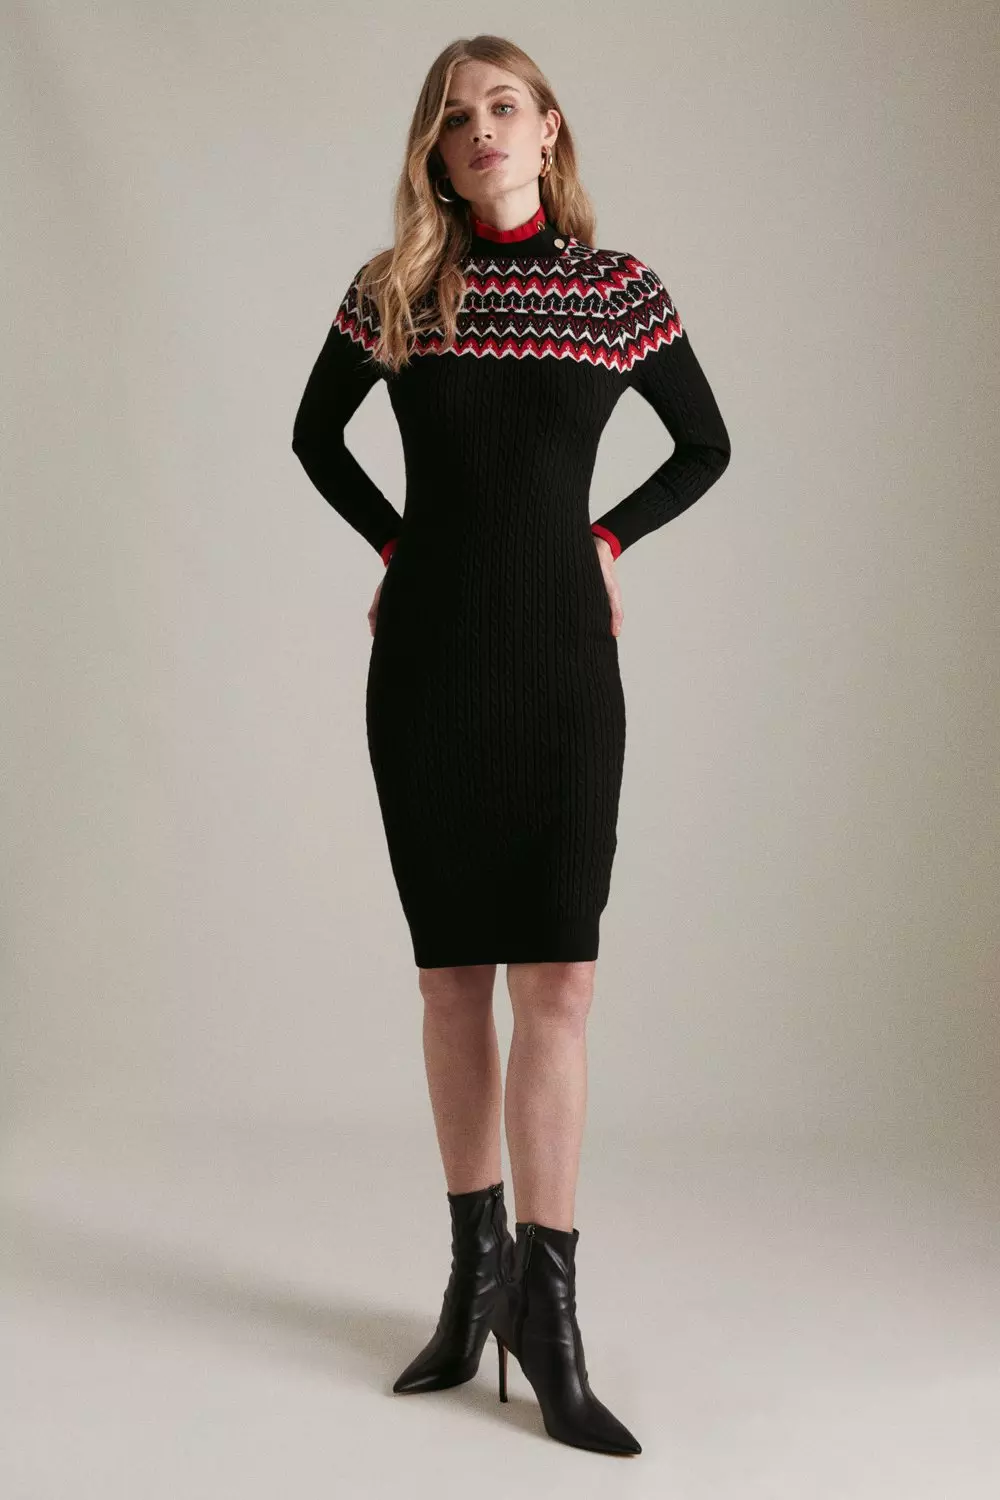 Sweater Dresses, Knitted Dresses